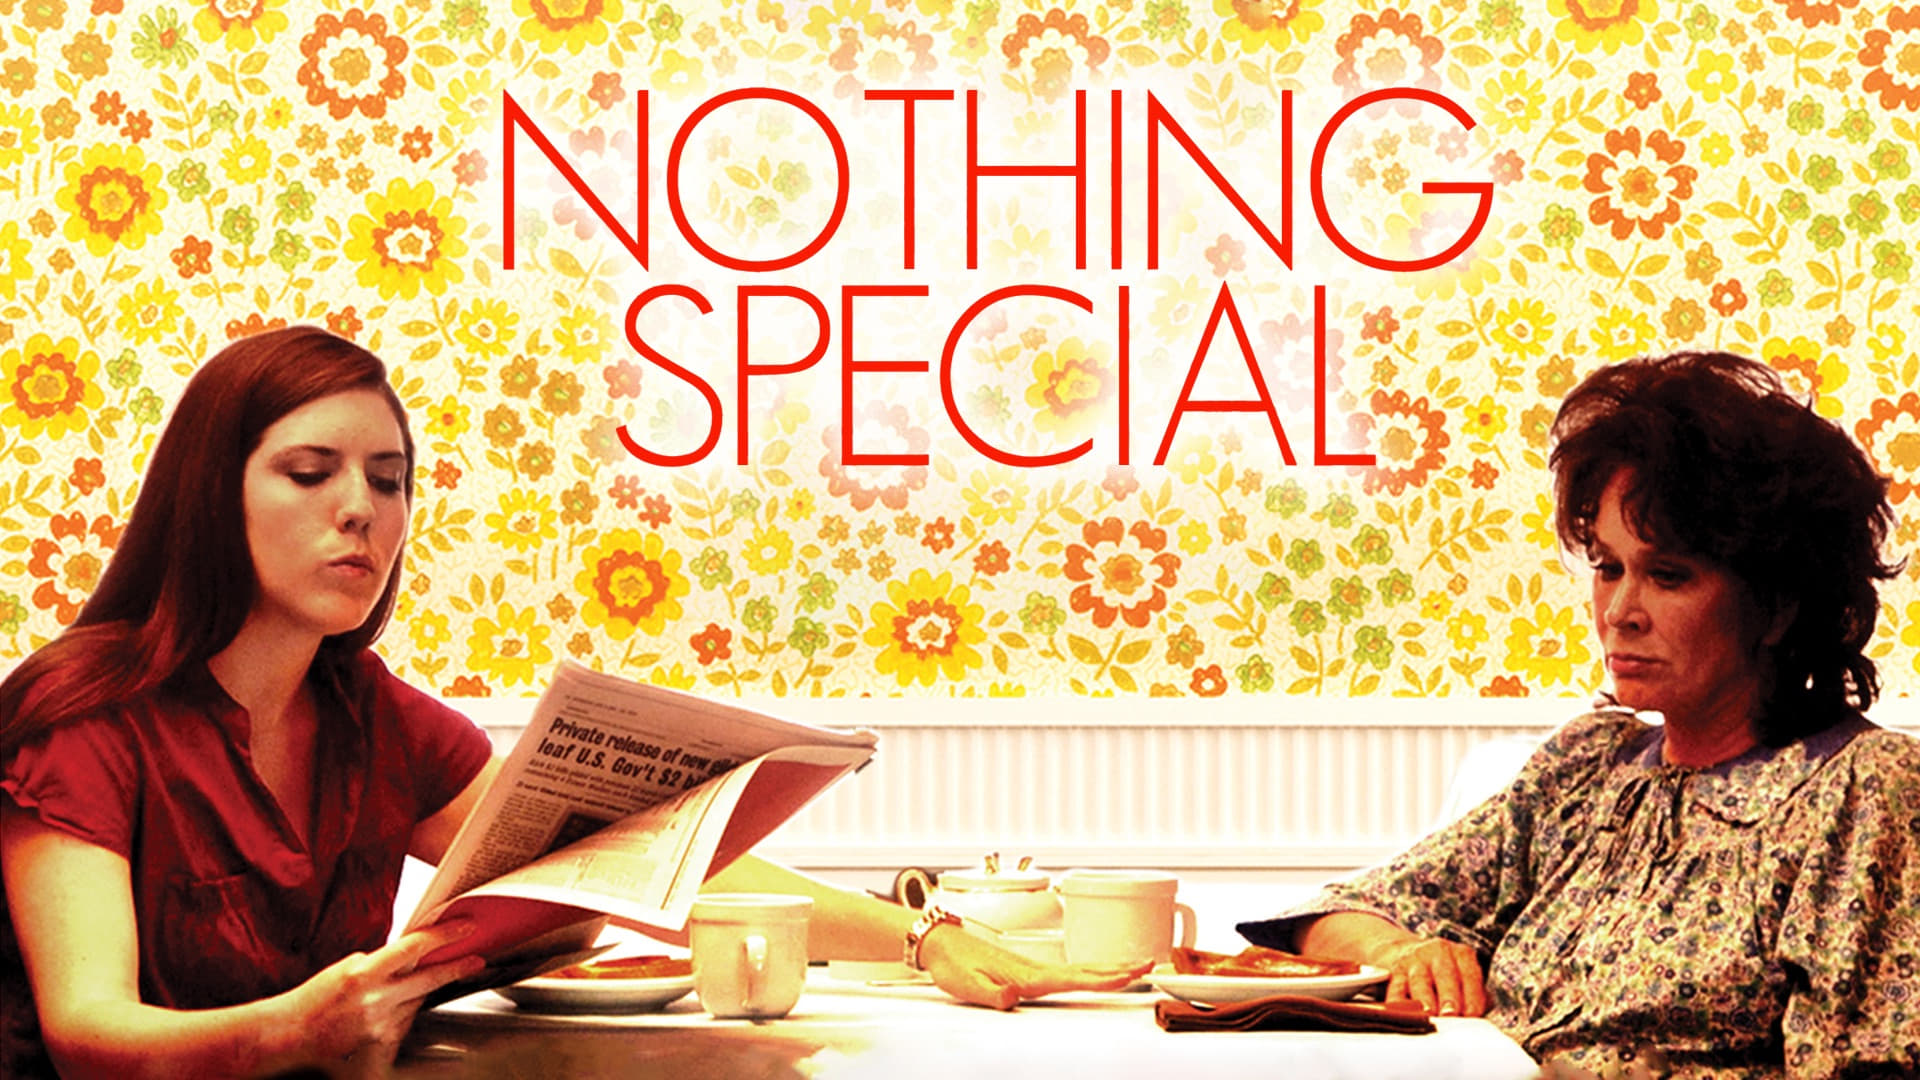 Nothing Special (2010)